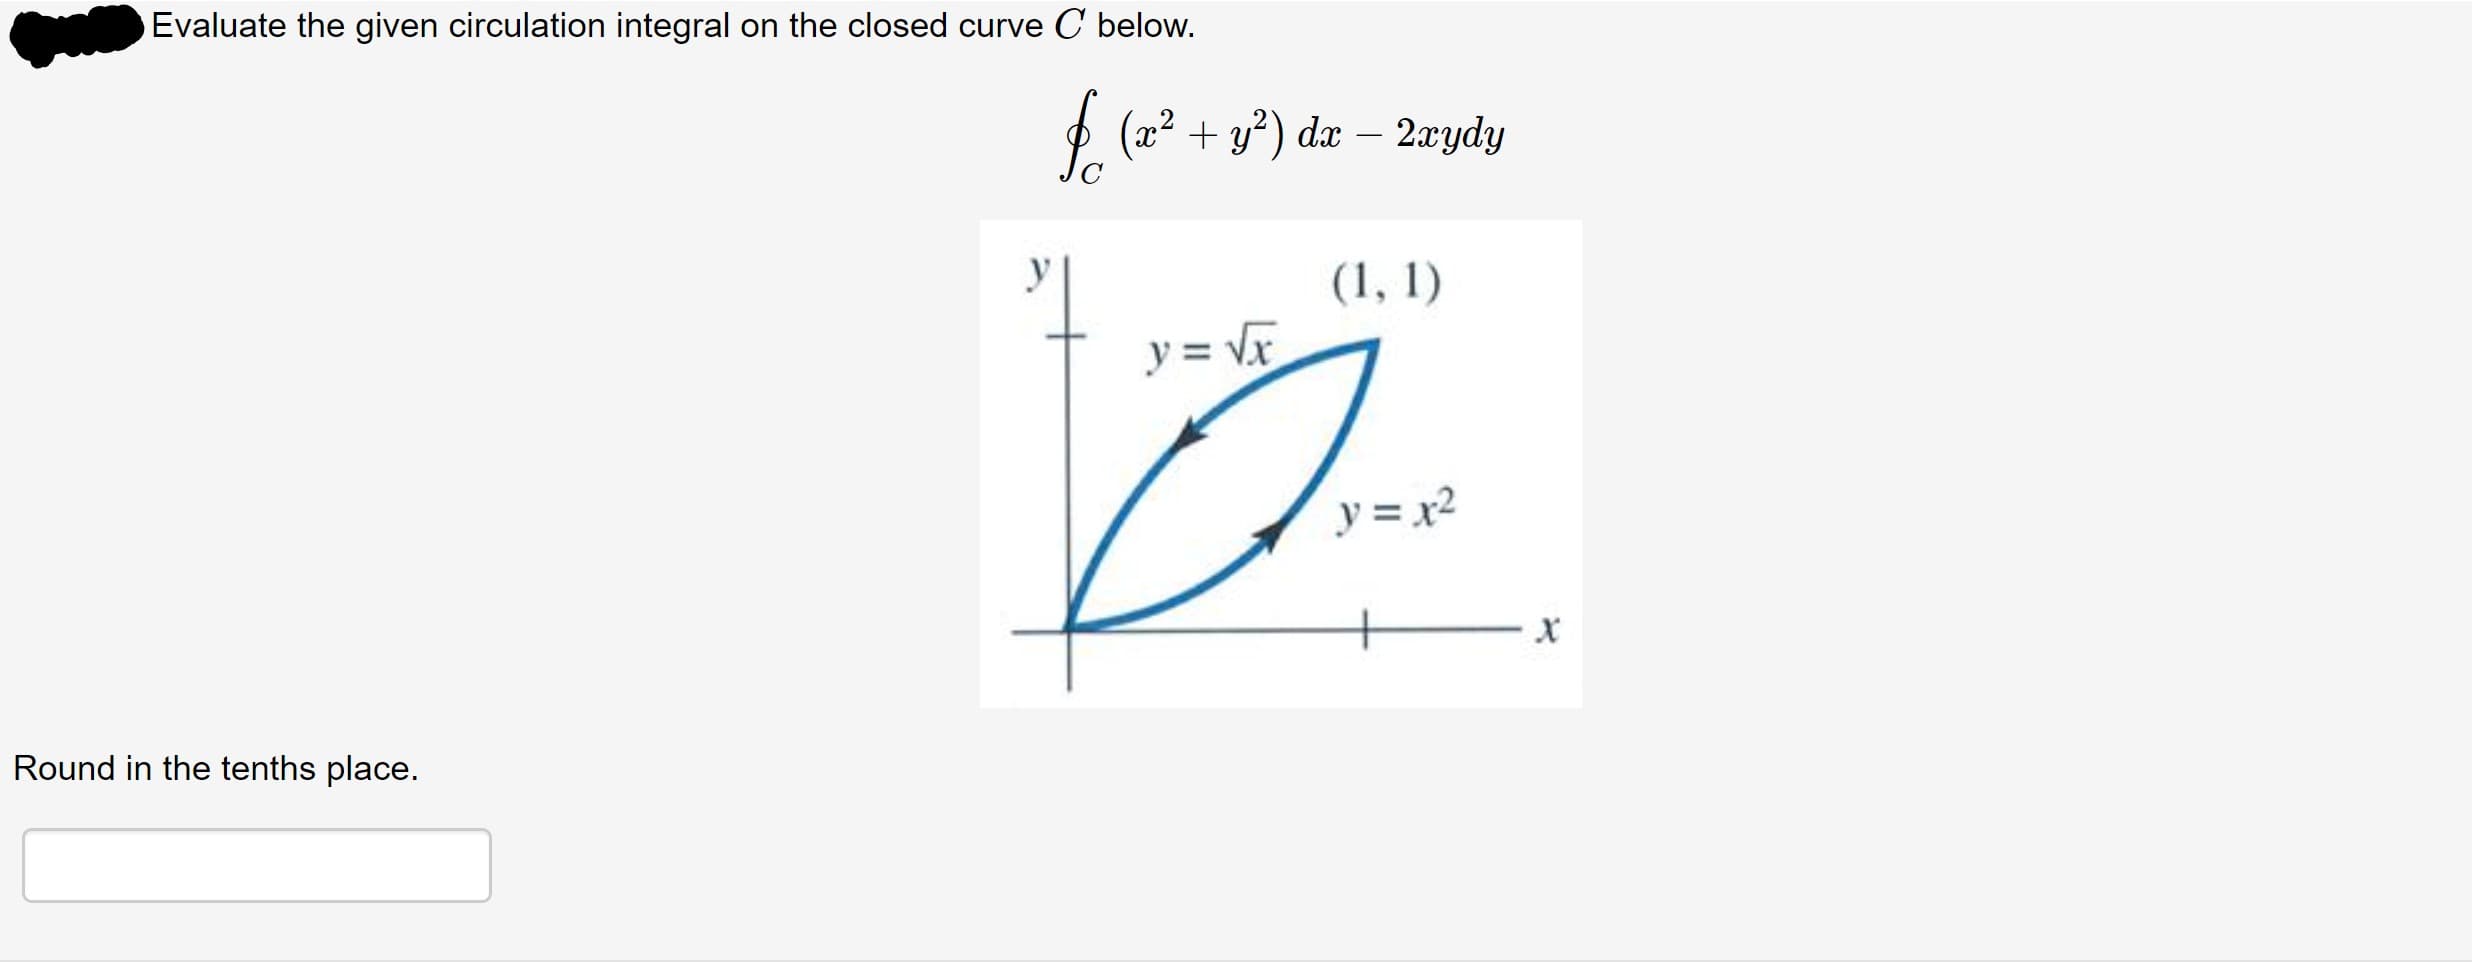 Evaluate the given circulation integral on the closed curve C below.
£. (* + s*) da – 2zydy
2xydy
(1, 1)
y = Vx
y = x2
Round in the tenths place.
